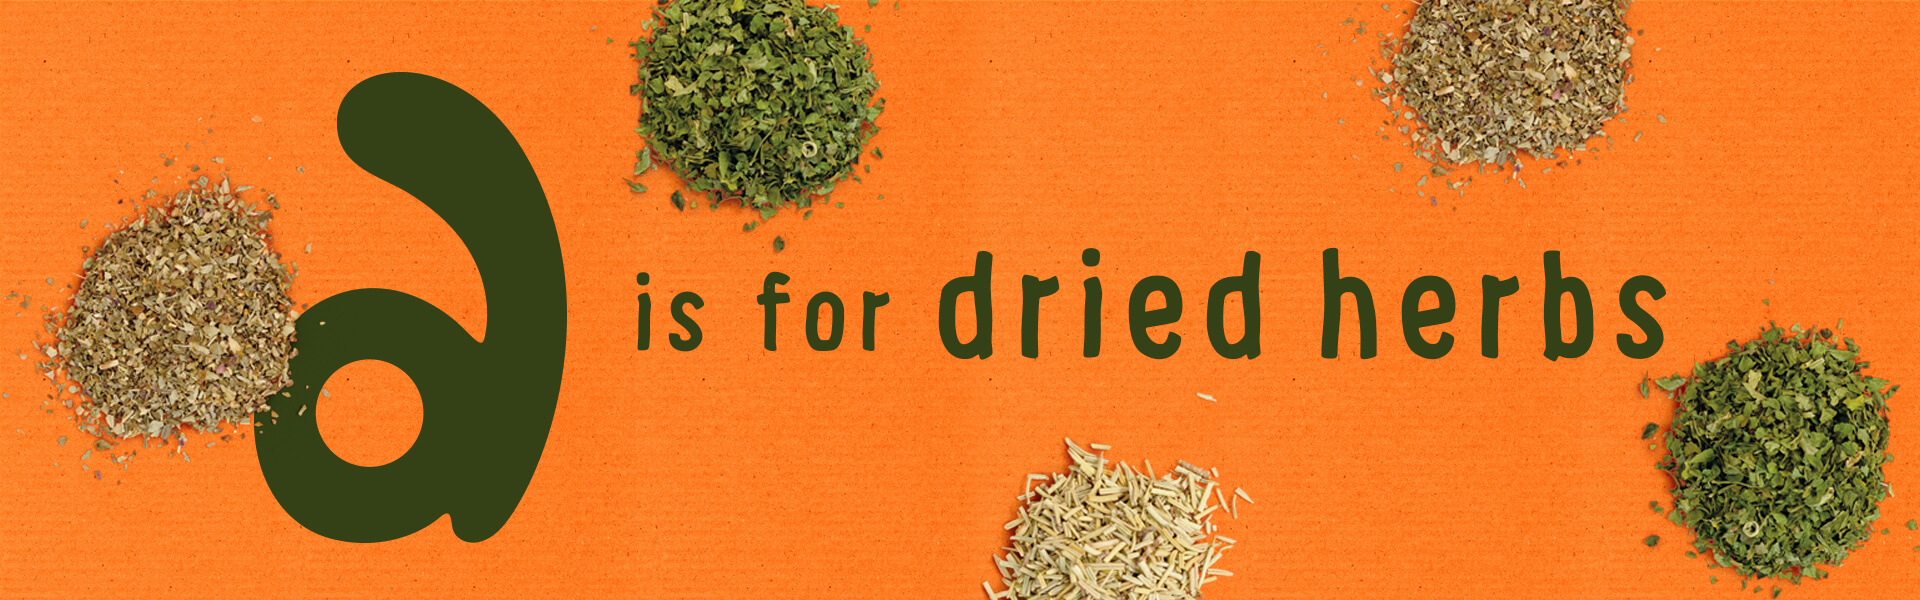 Organix d is for dried herbs